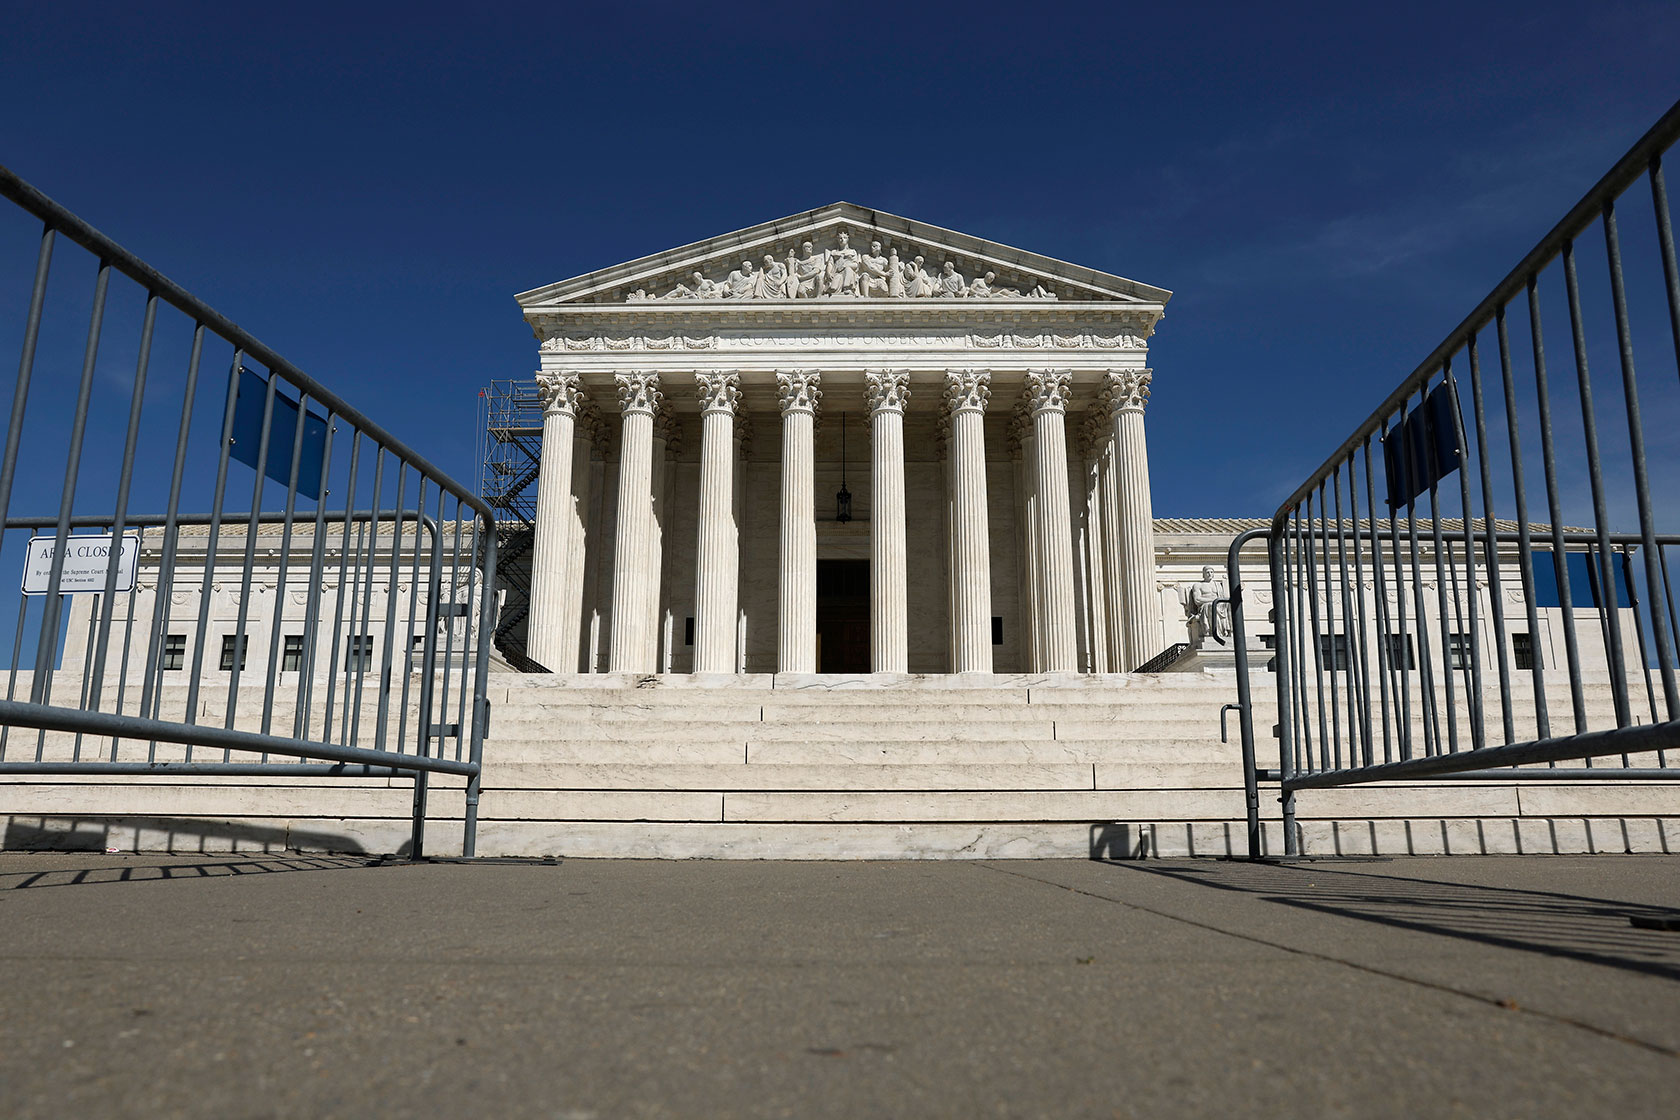 Photo shows the Supreme Court building with fencing in the foreground against a sunny blue sky